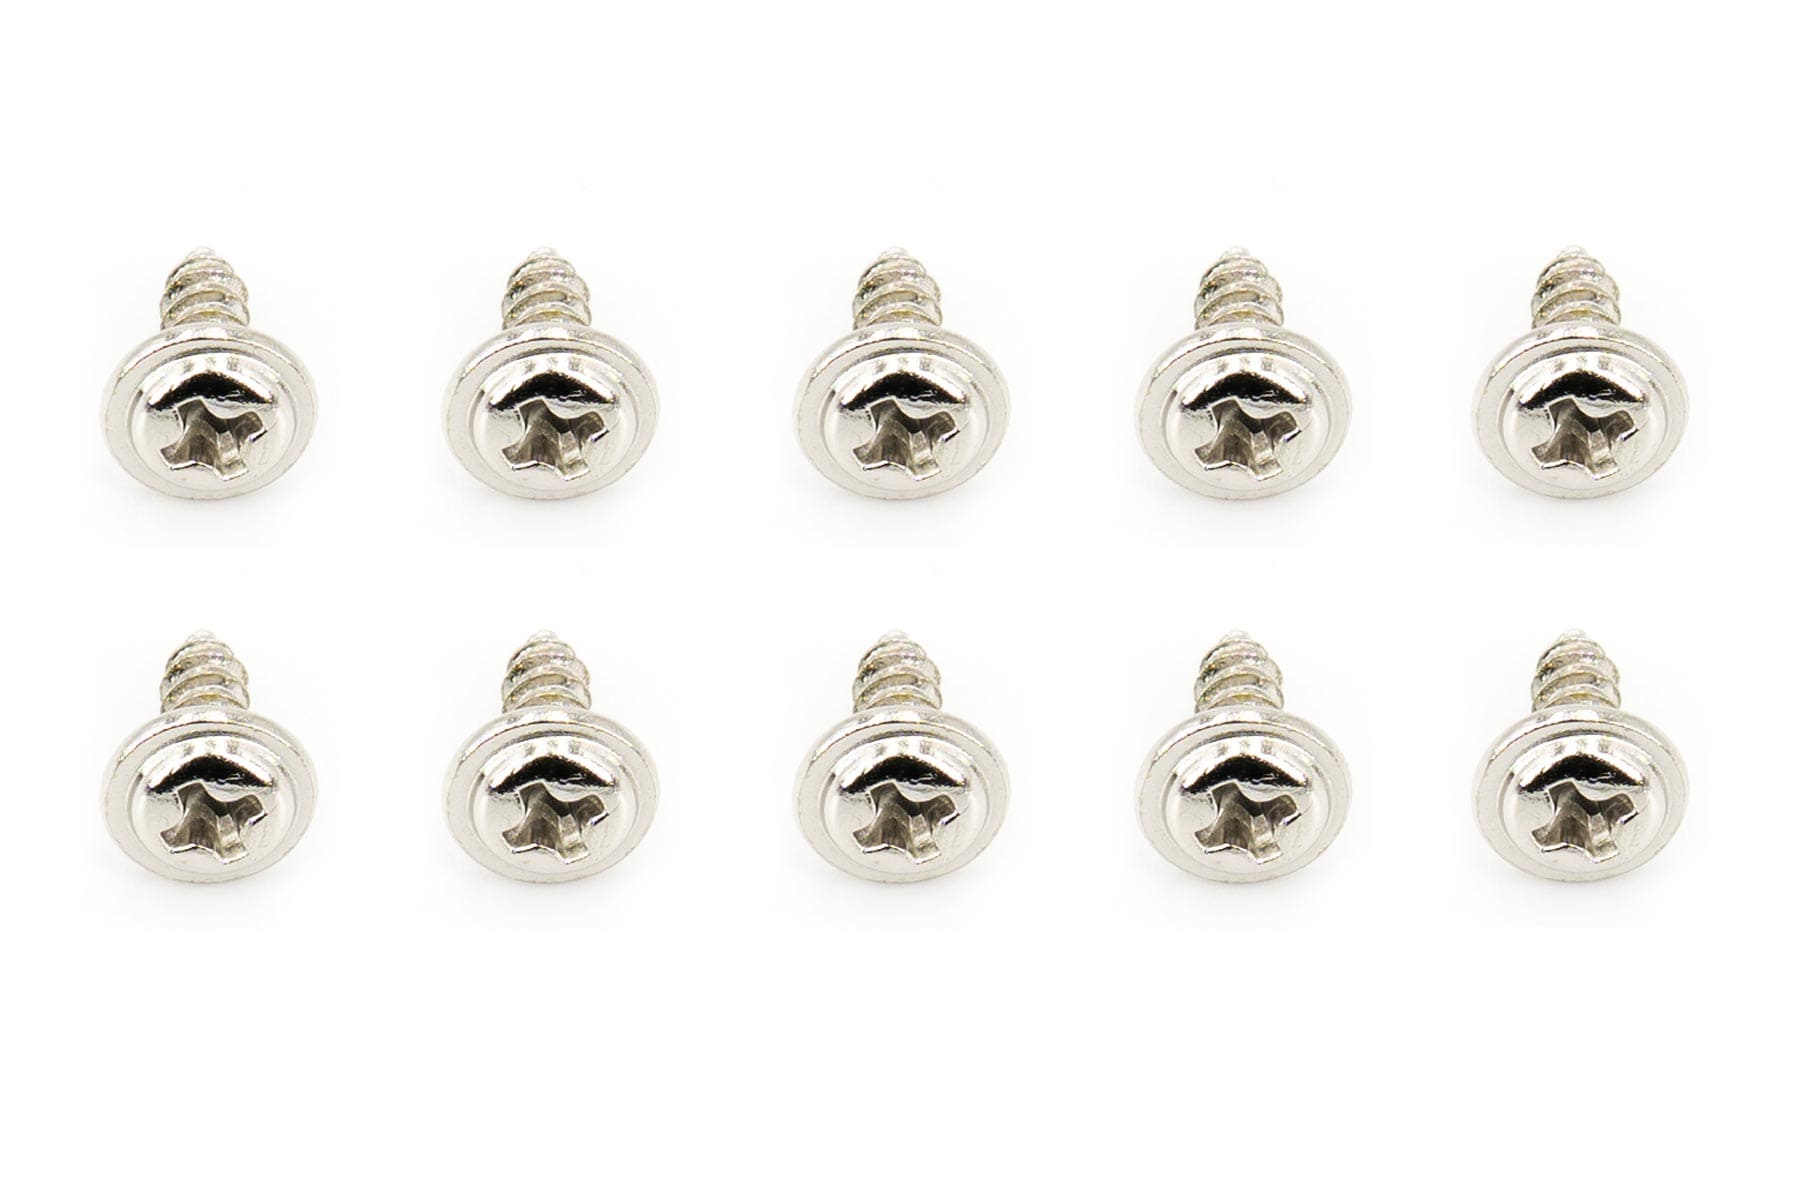 BenchCraft 3mm x 8mm Self-Tapping Washer Head Screws (10 Pack) BCT5040-050